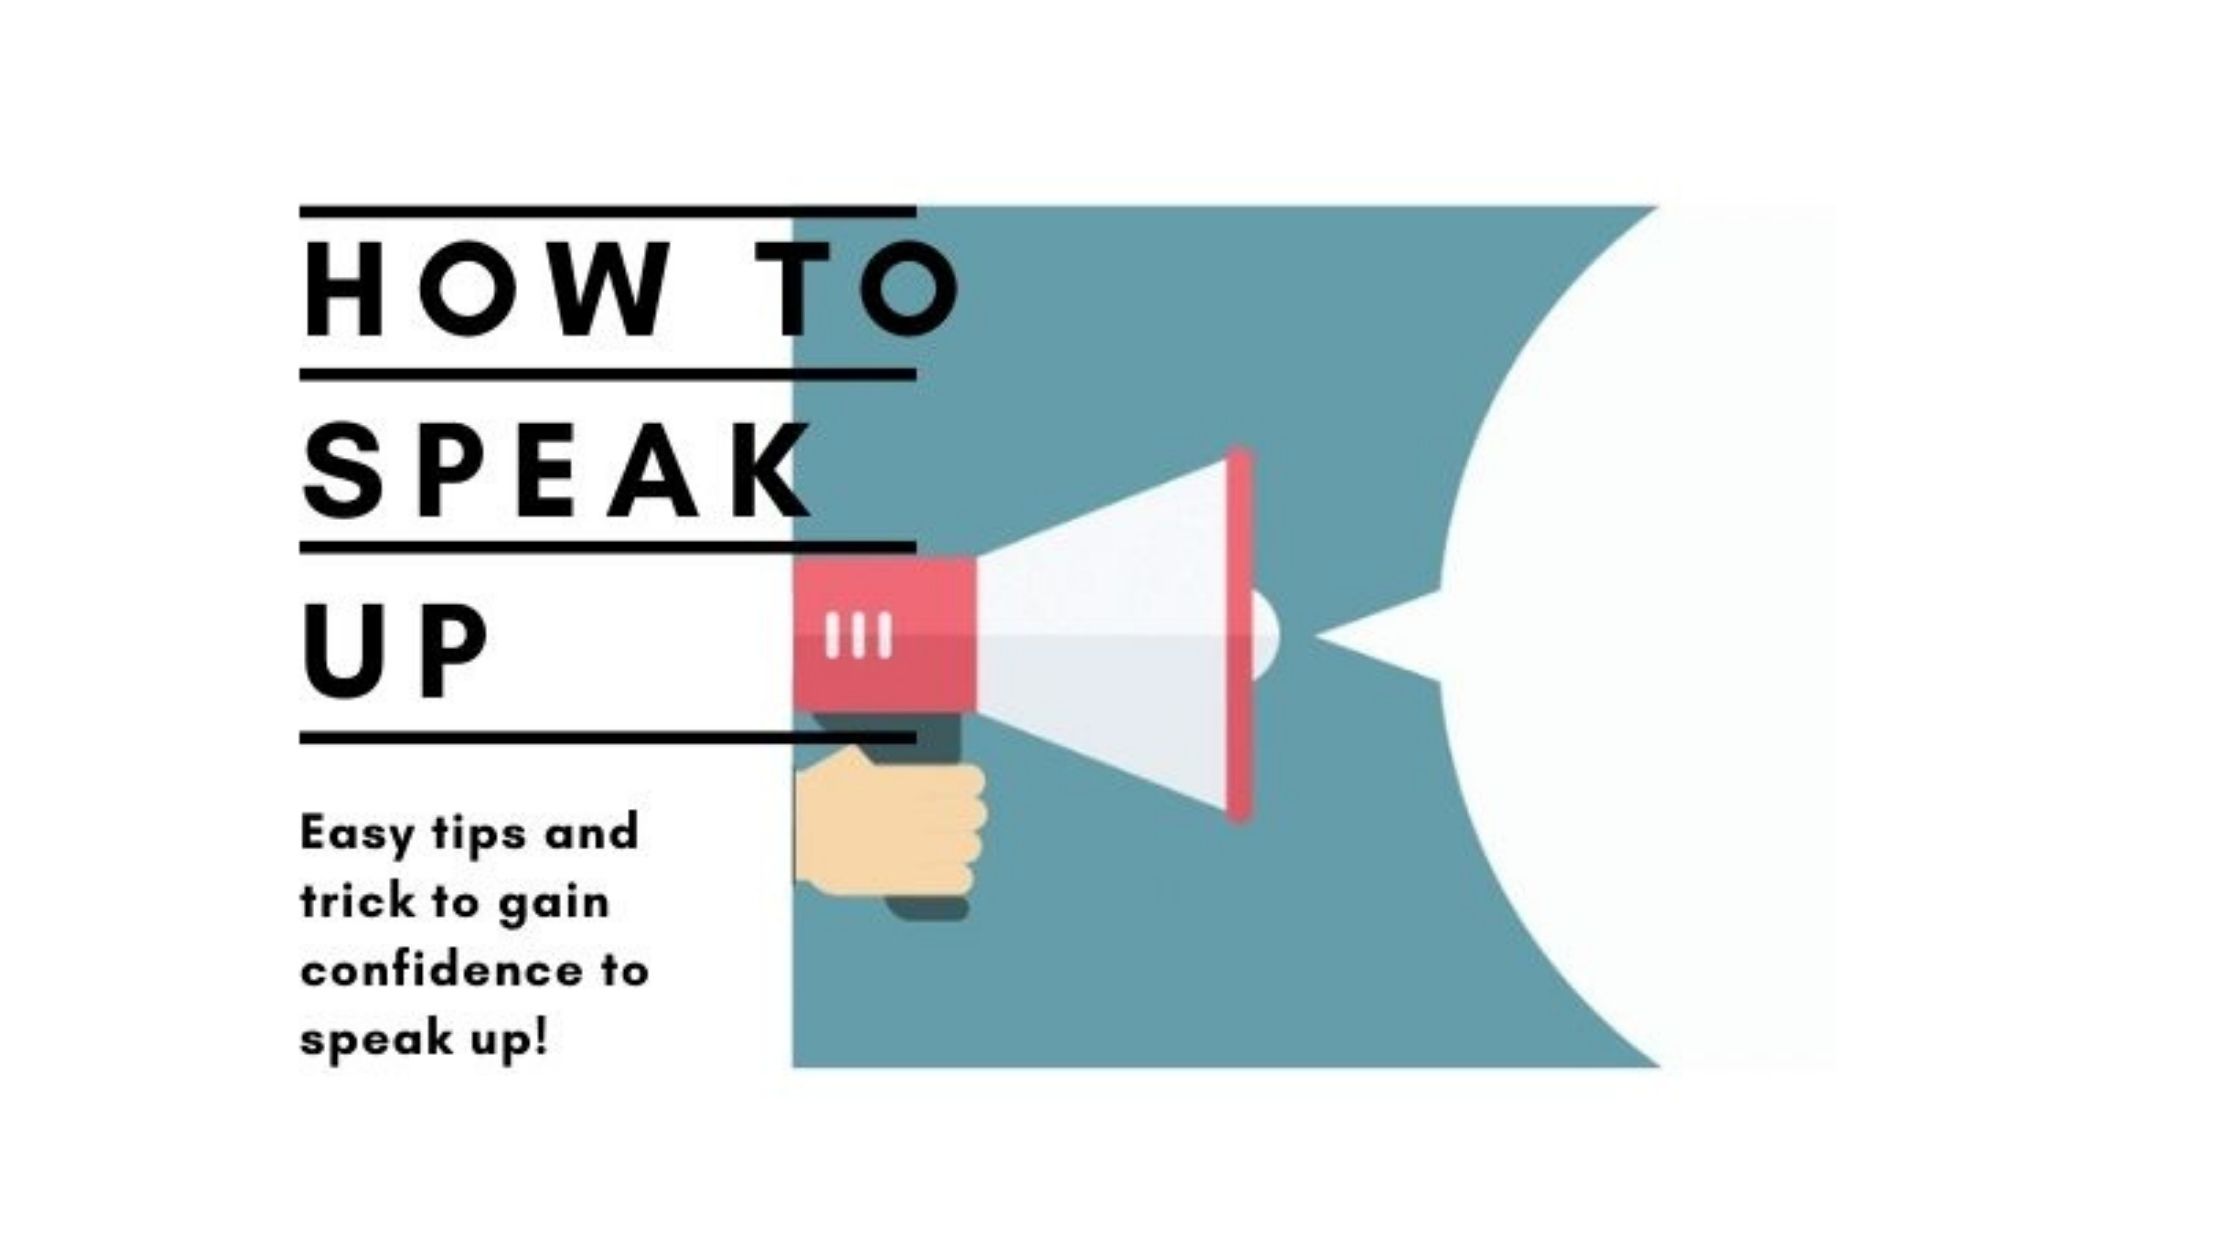 How to speak up: easy guide to speak up with confidence under a week